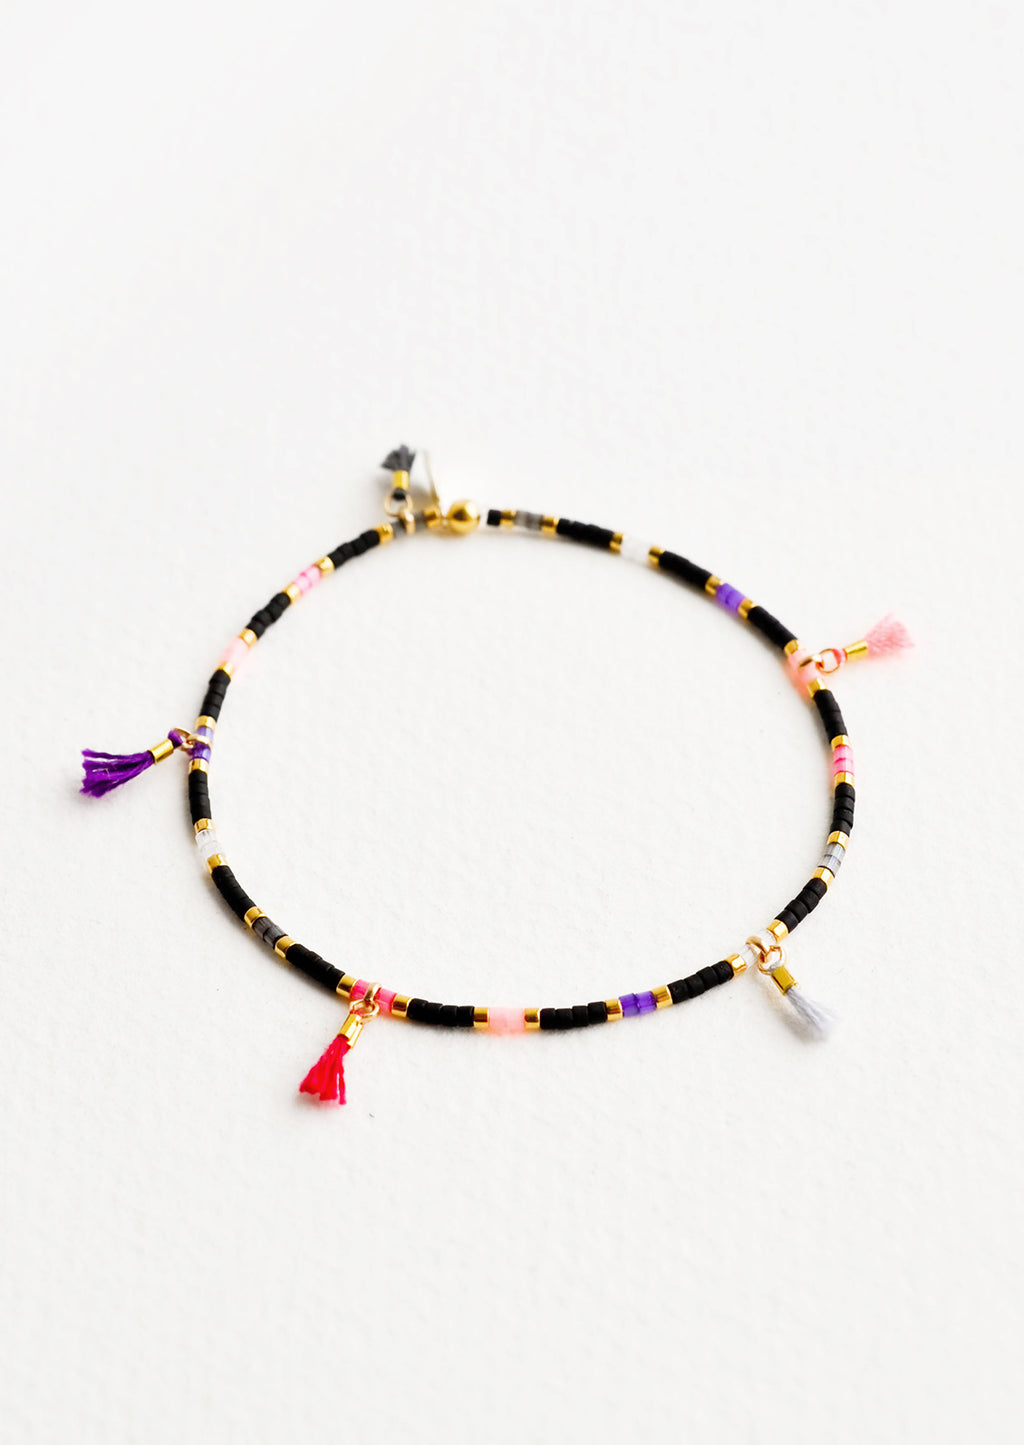 Black Multi: Bracelet featuring black, gold, pink and purple glass beads interspersed with 5 small multicolor string tassels on an elastic cord.